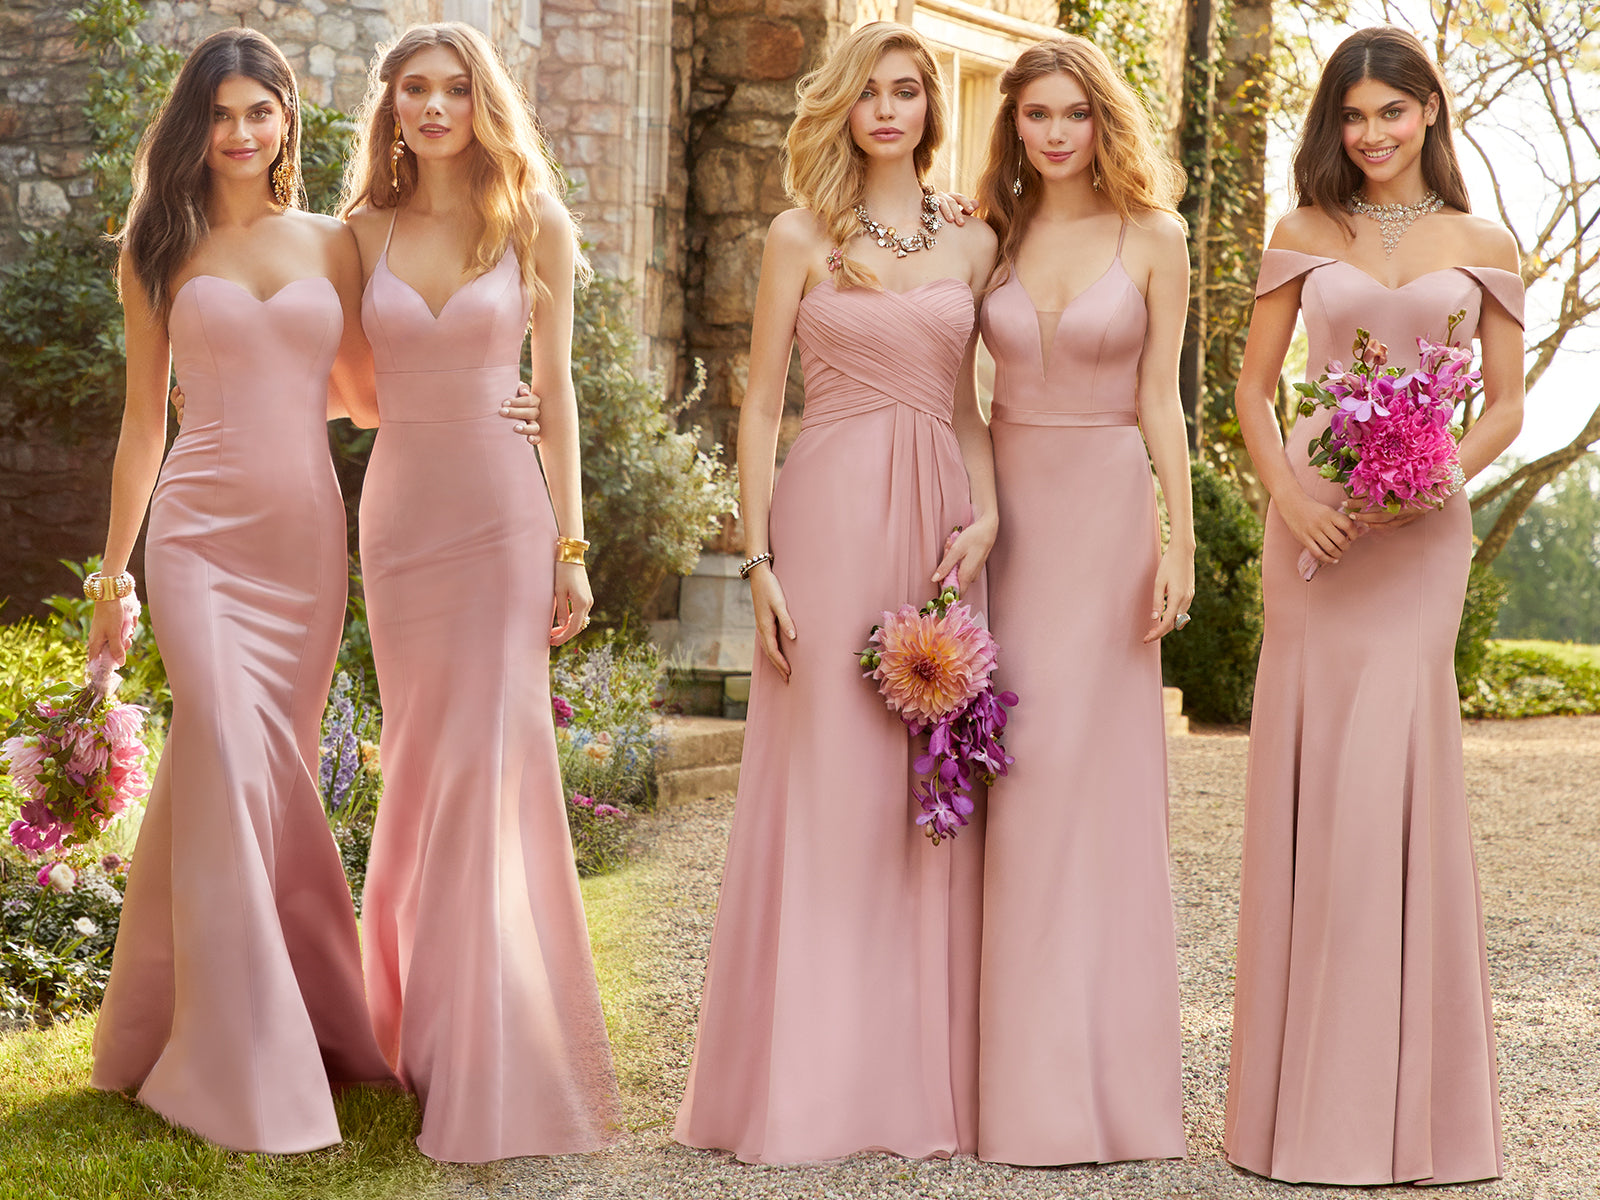 dress styles for maid of honour